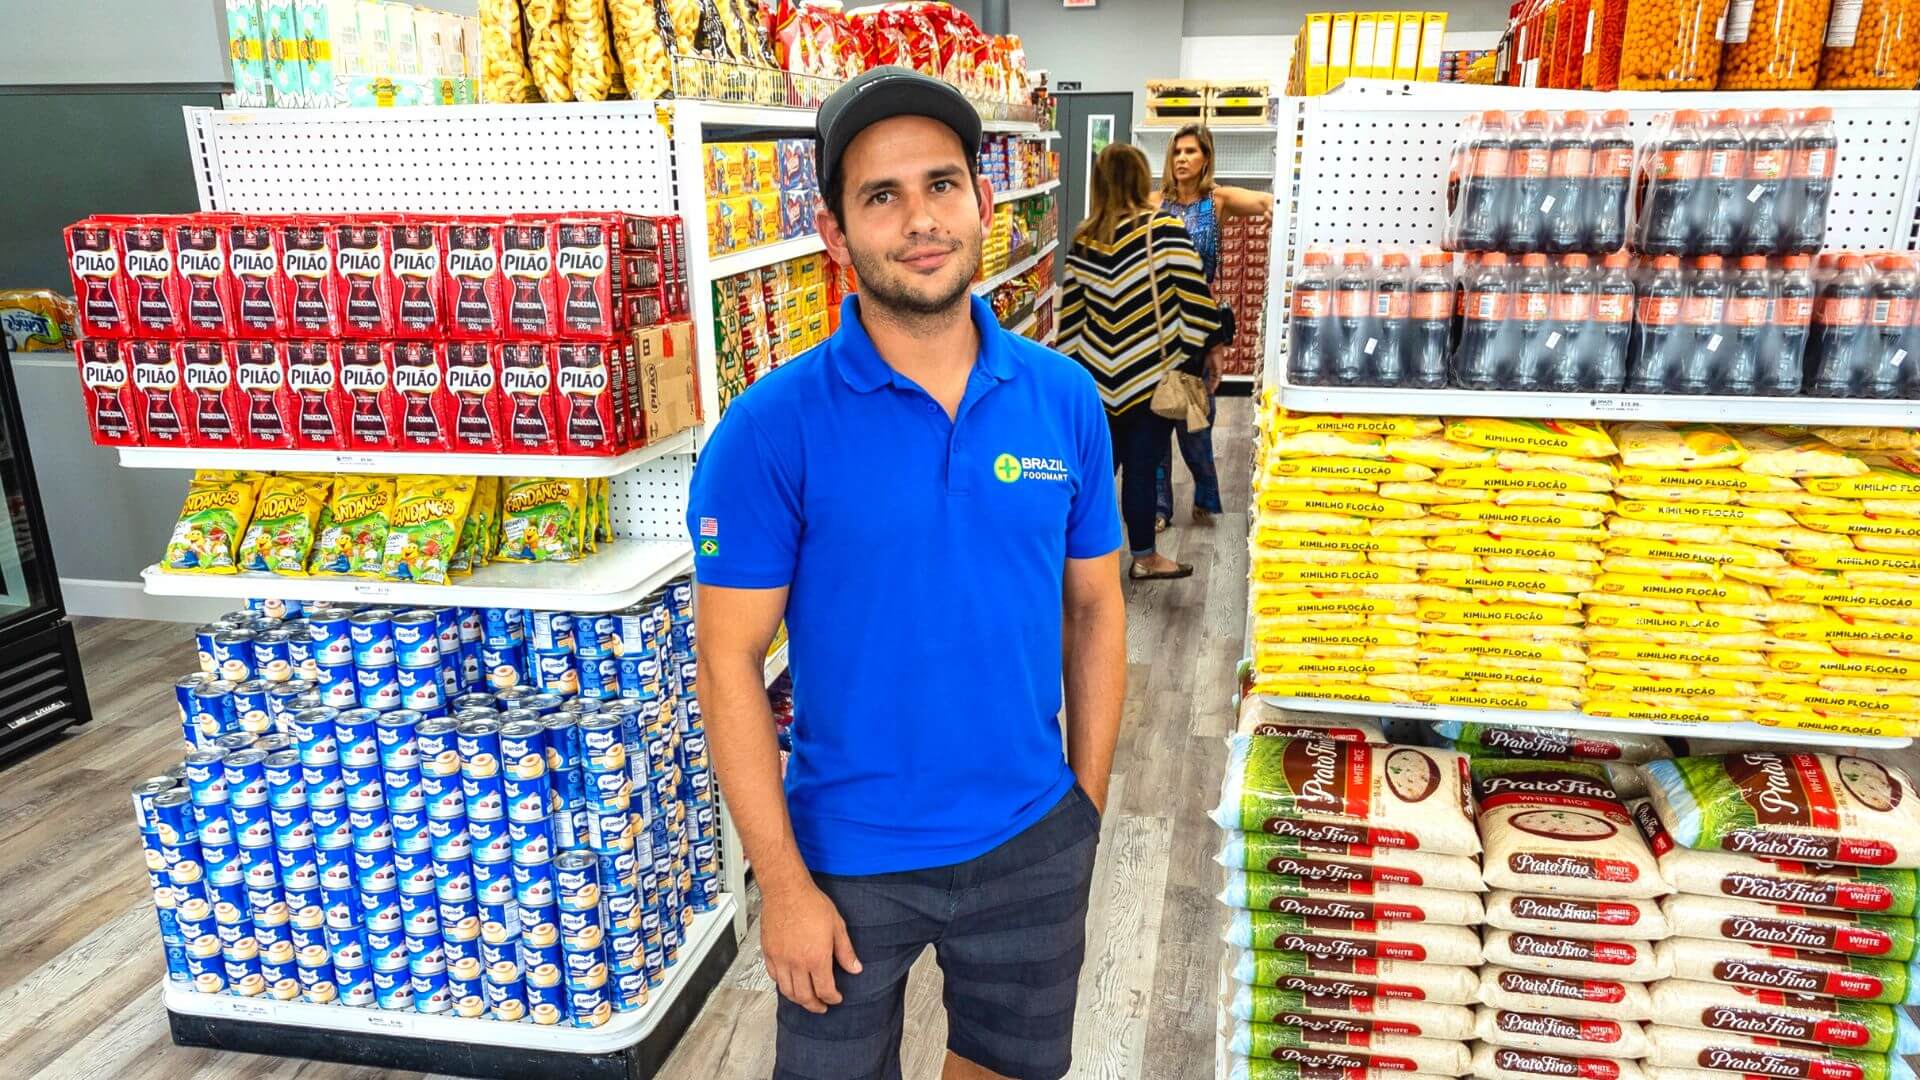 Man in blue shirt standing in a grocery store aisle.